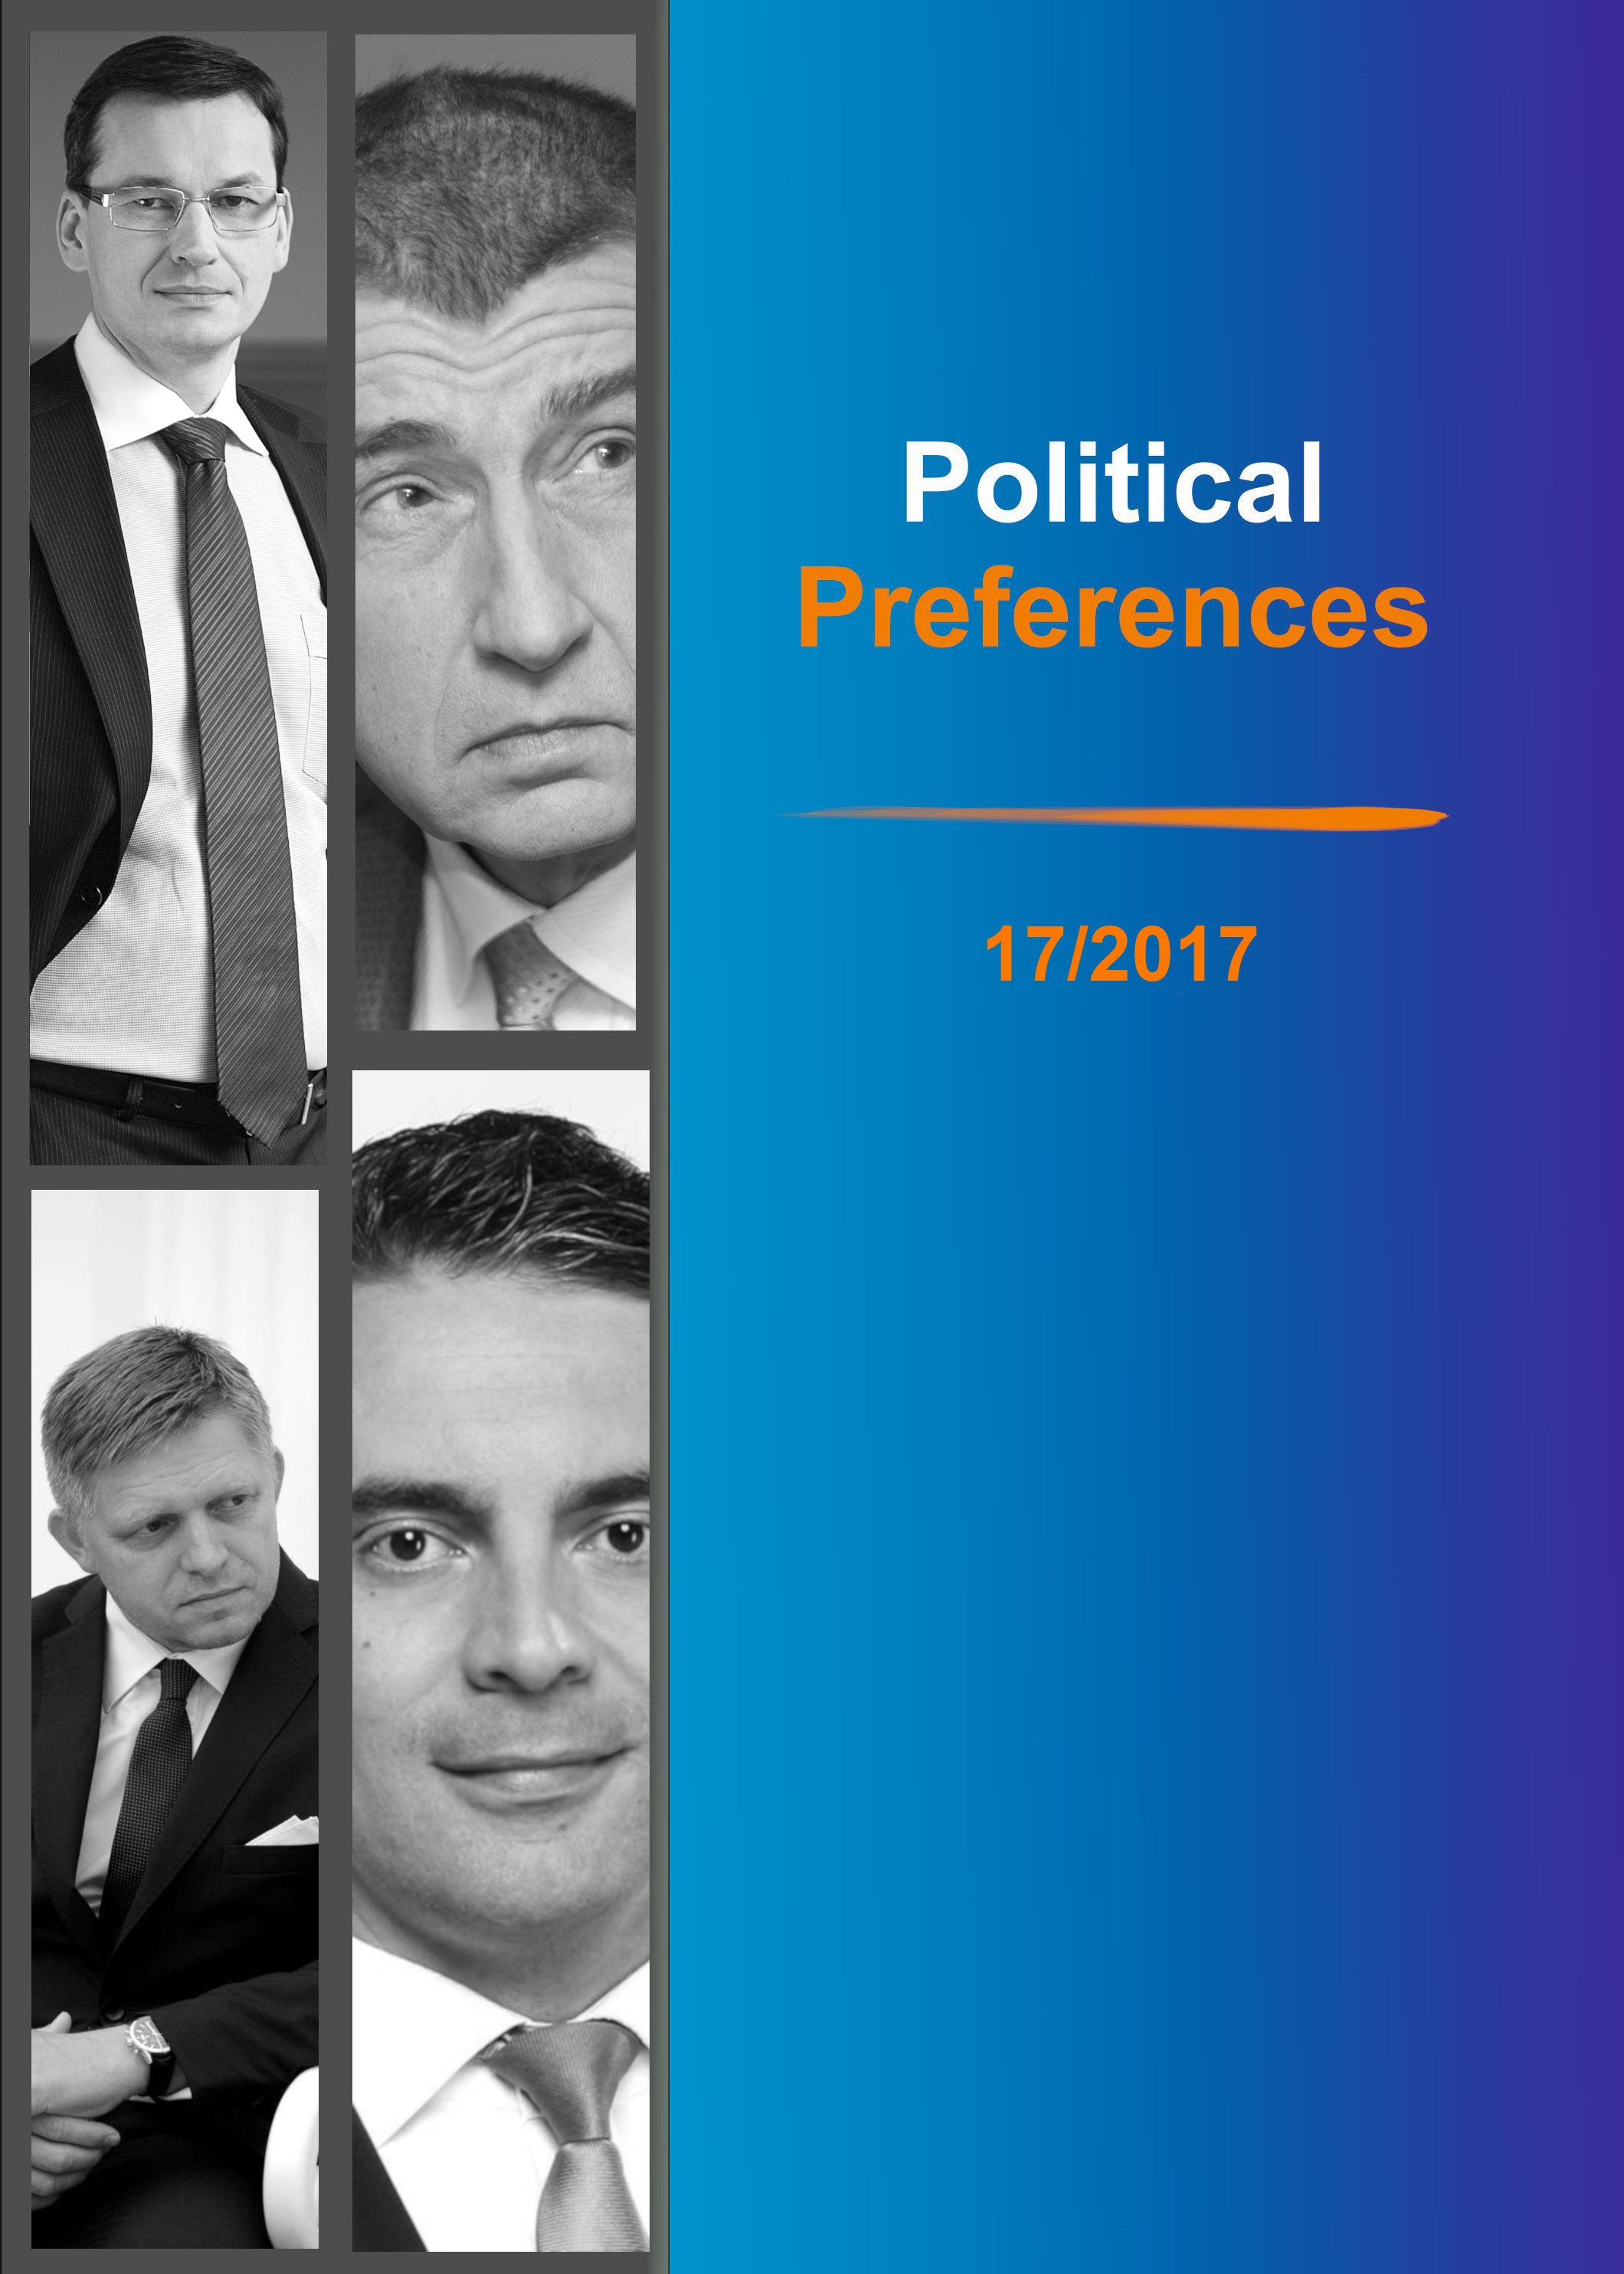 Coverage of politics in Wiadomości TVP1 after the parliamentary elections in 2015: balanced or biased? Cover Image